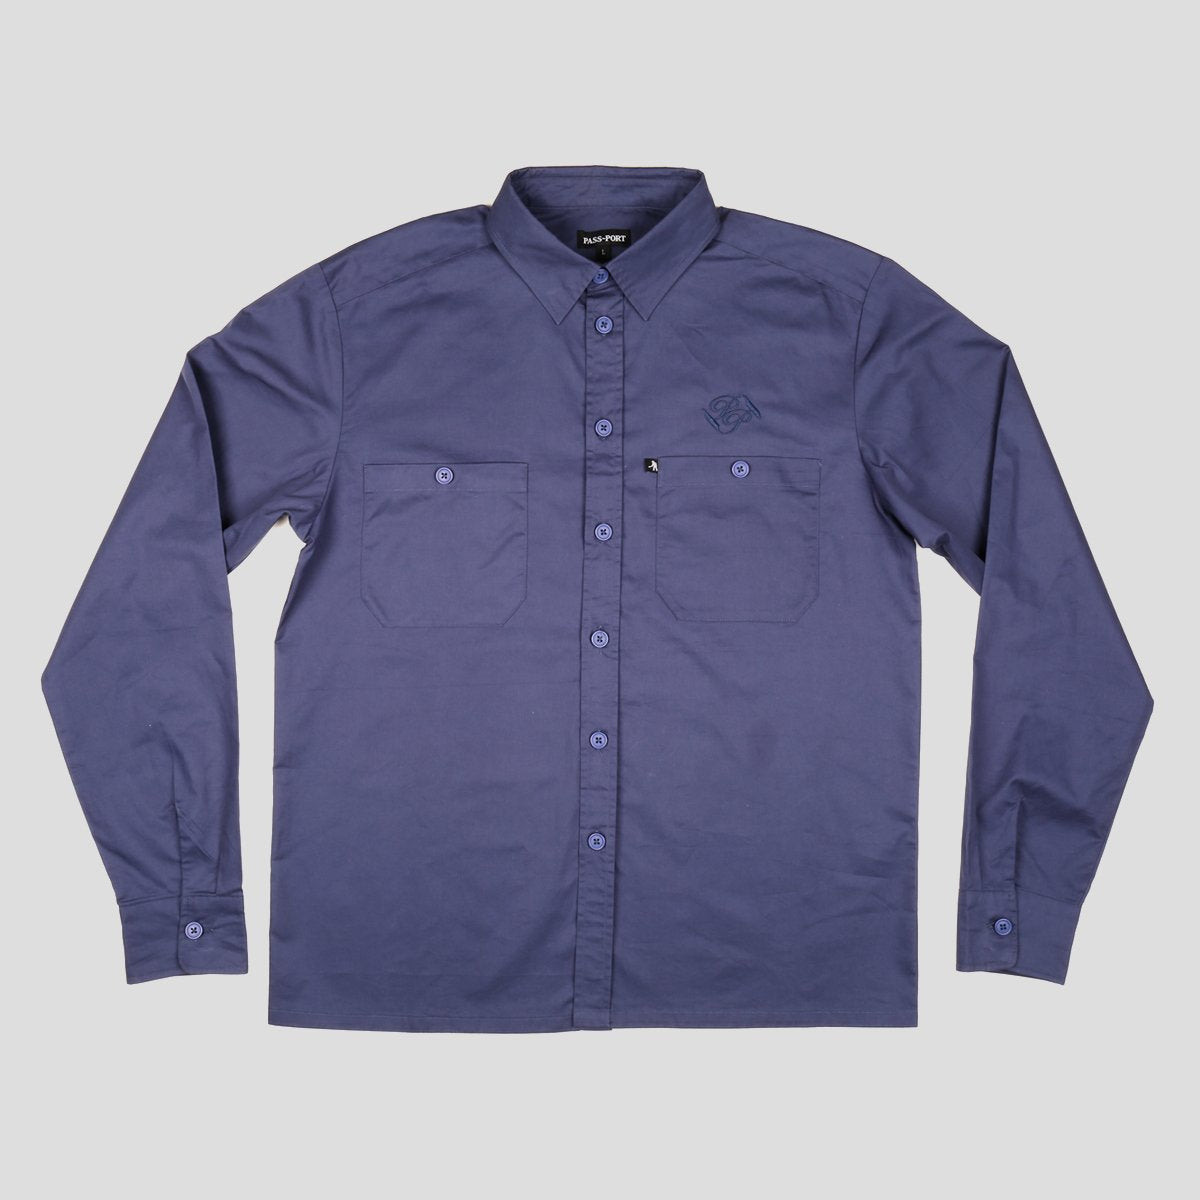 Workers Banner Longsleeve Shirt (French Navy)